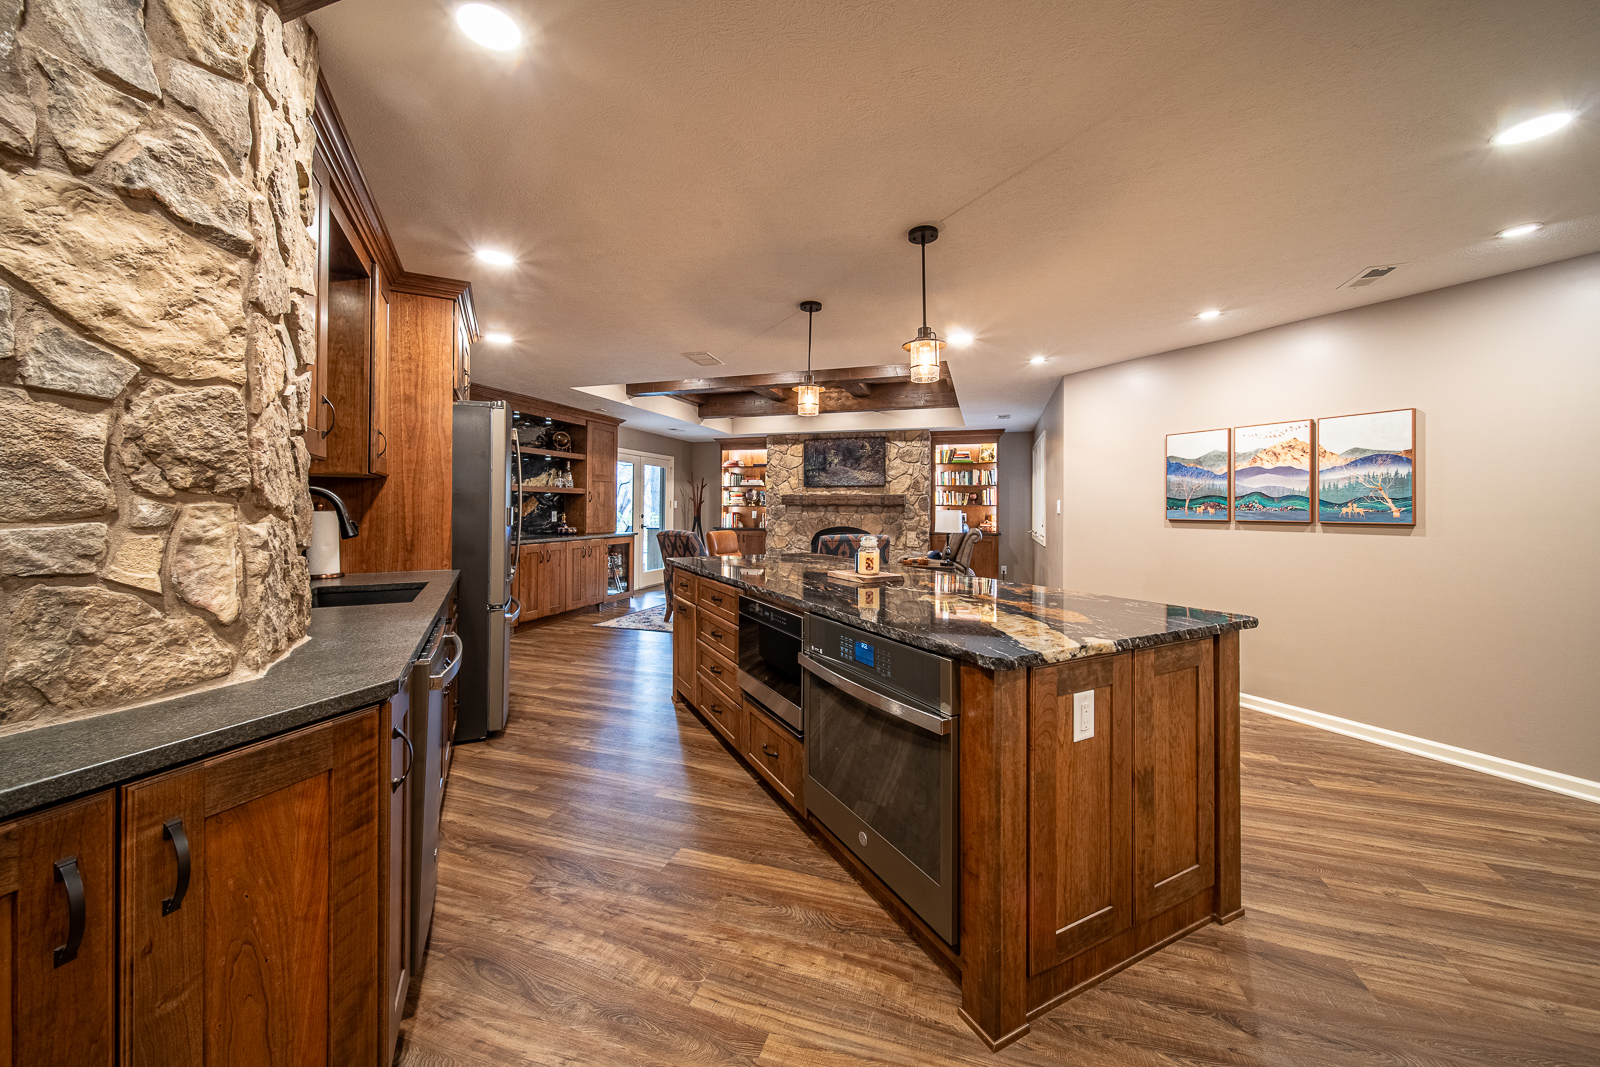 Contemporary basement kitchen with granite countertop and bar seating on Ripple Creek Drive.